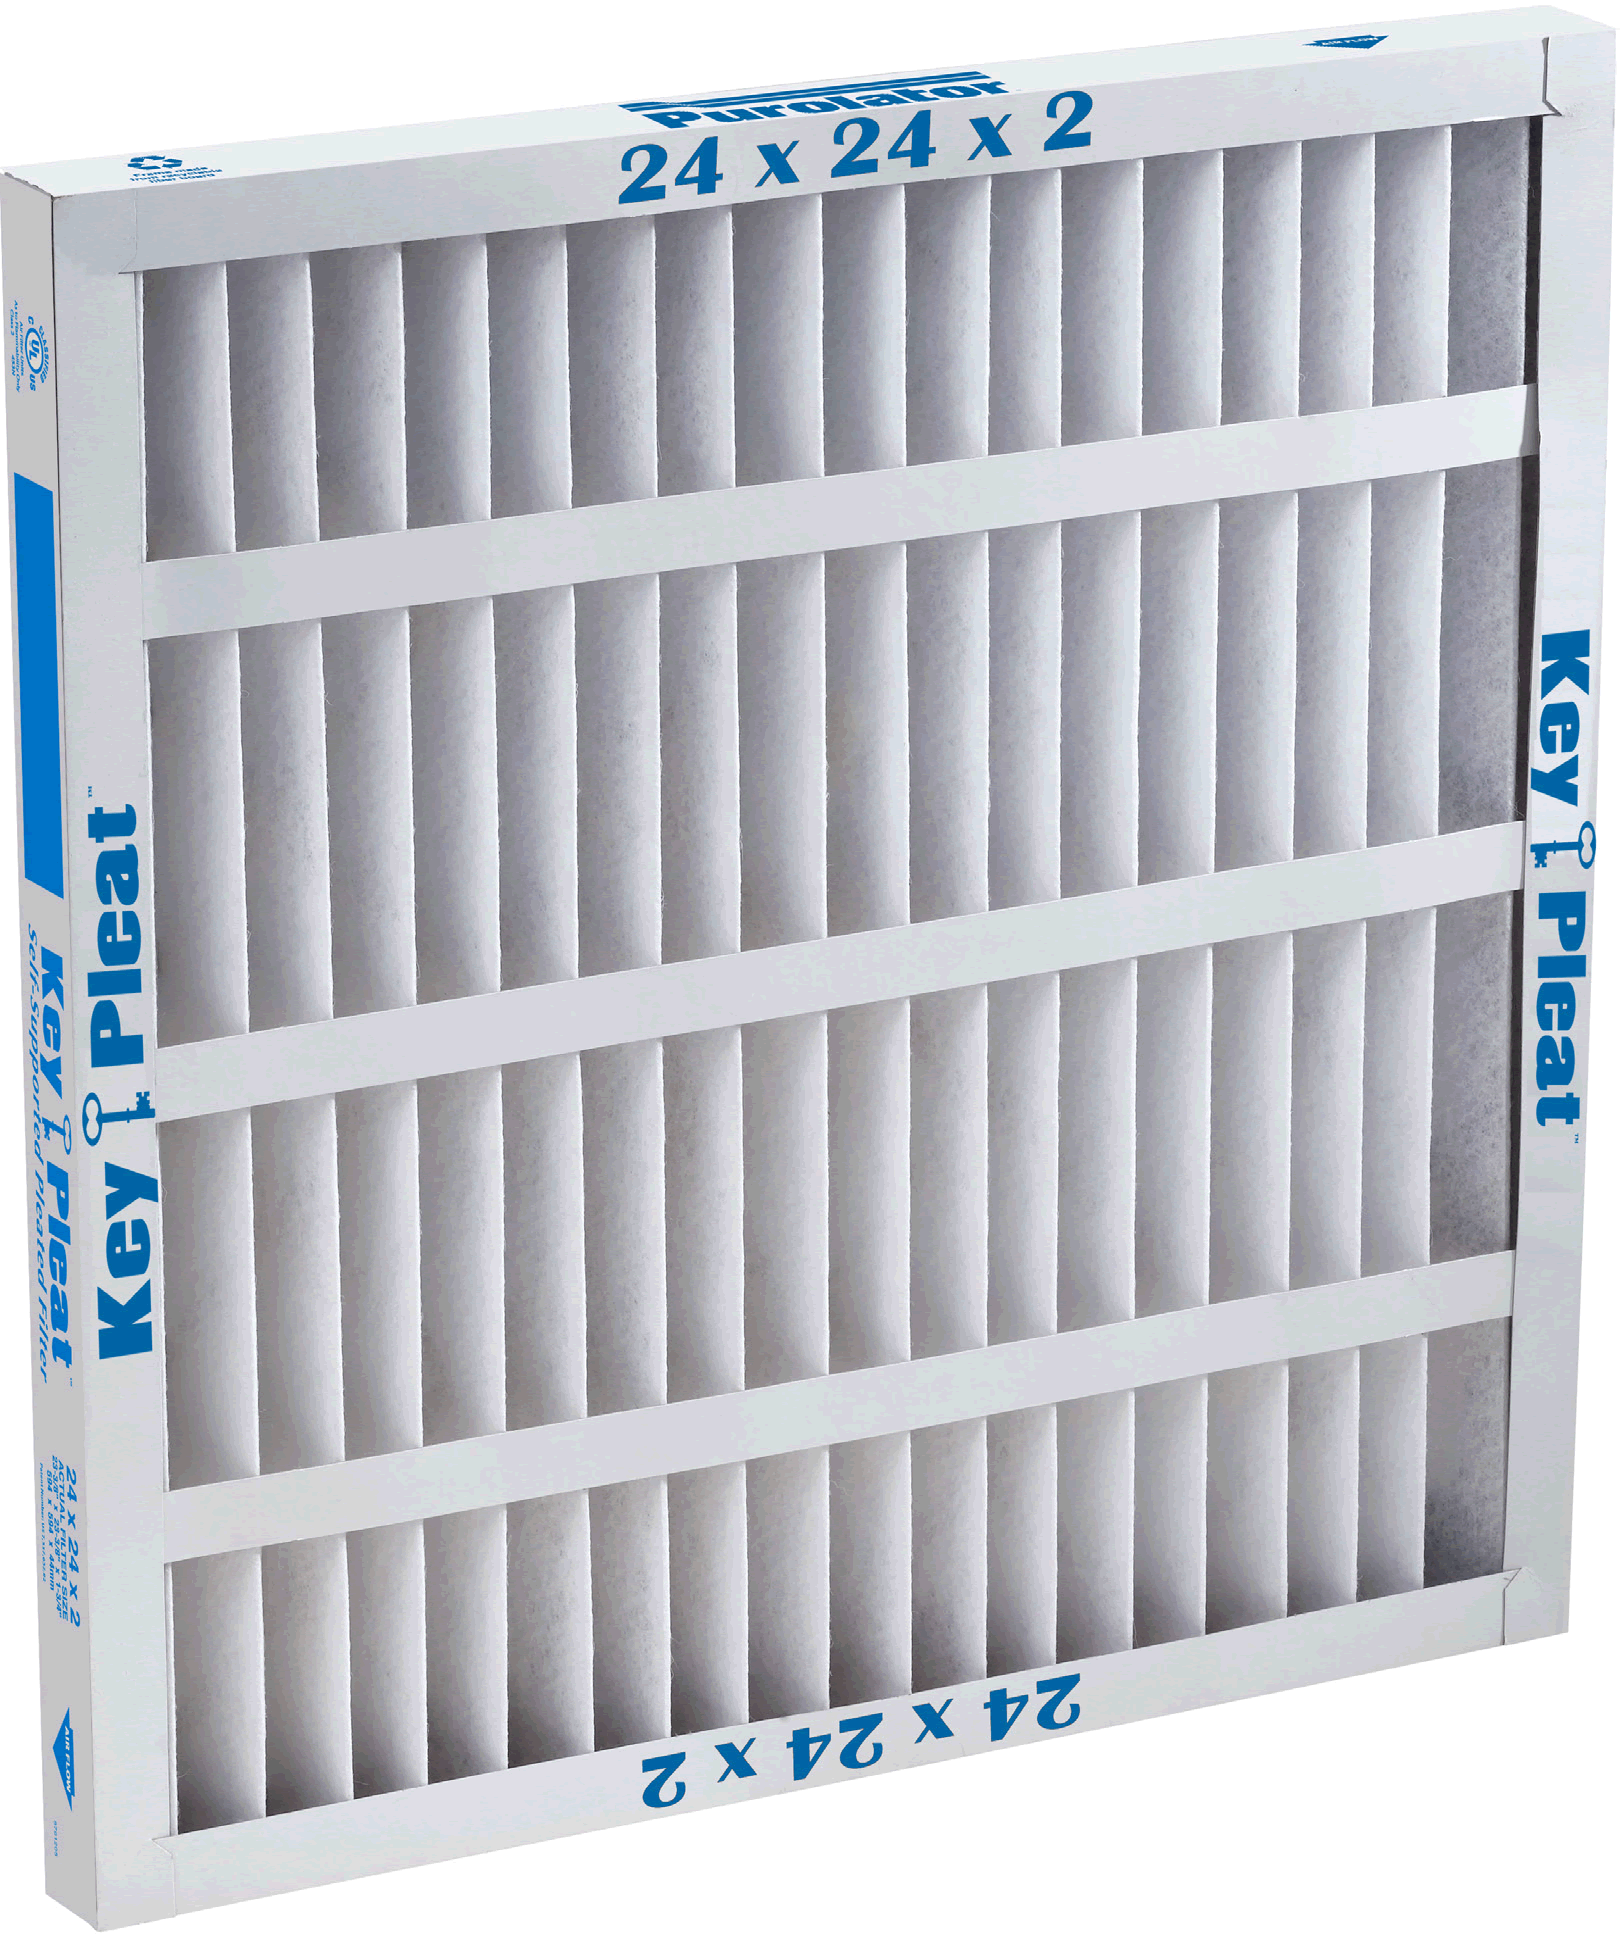 Sterling Seal SSI5251070884XCS Purolator Key Pleat Extended Surface Air filter by Mechanical MERV 8 100% Synthetic filter Media 14 W x 25 H x 1 D Pack of 12 Heavy Duty Beverage Board Frame